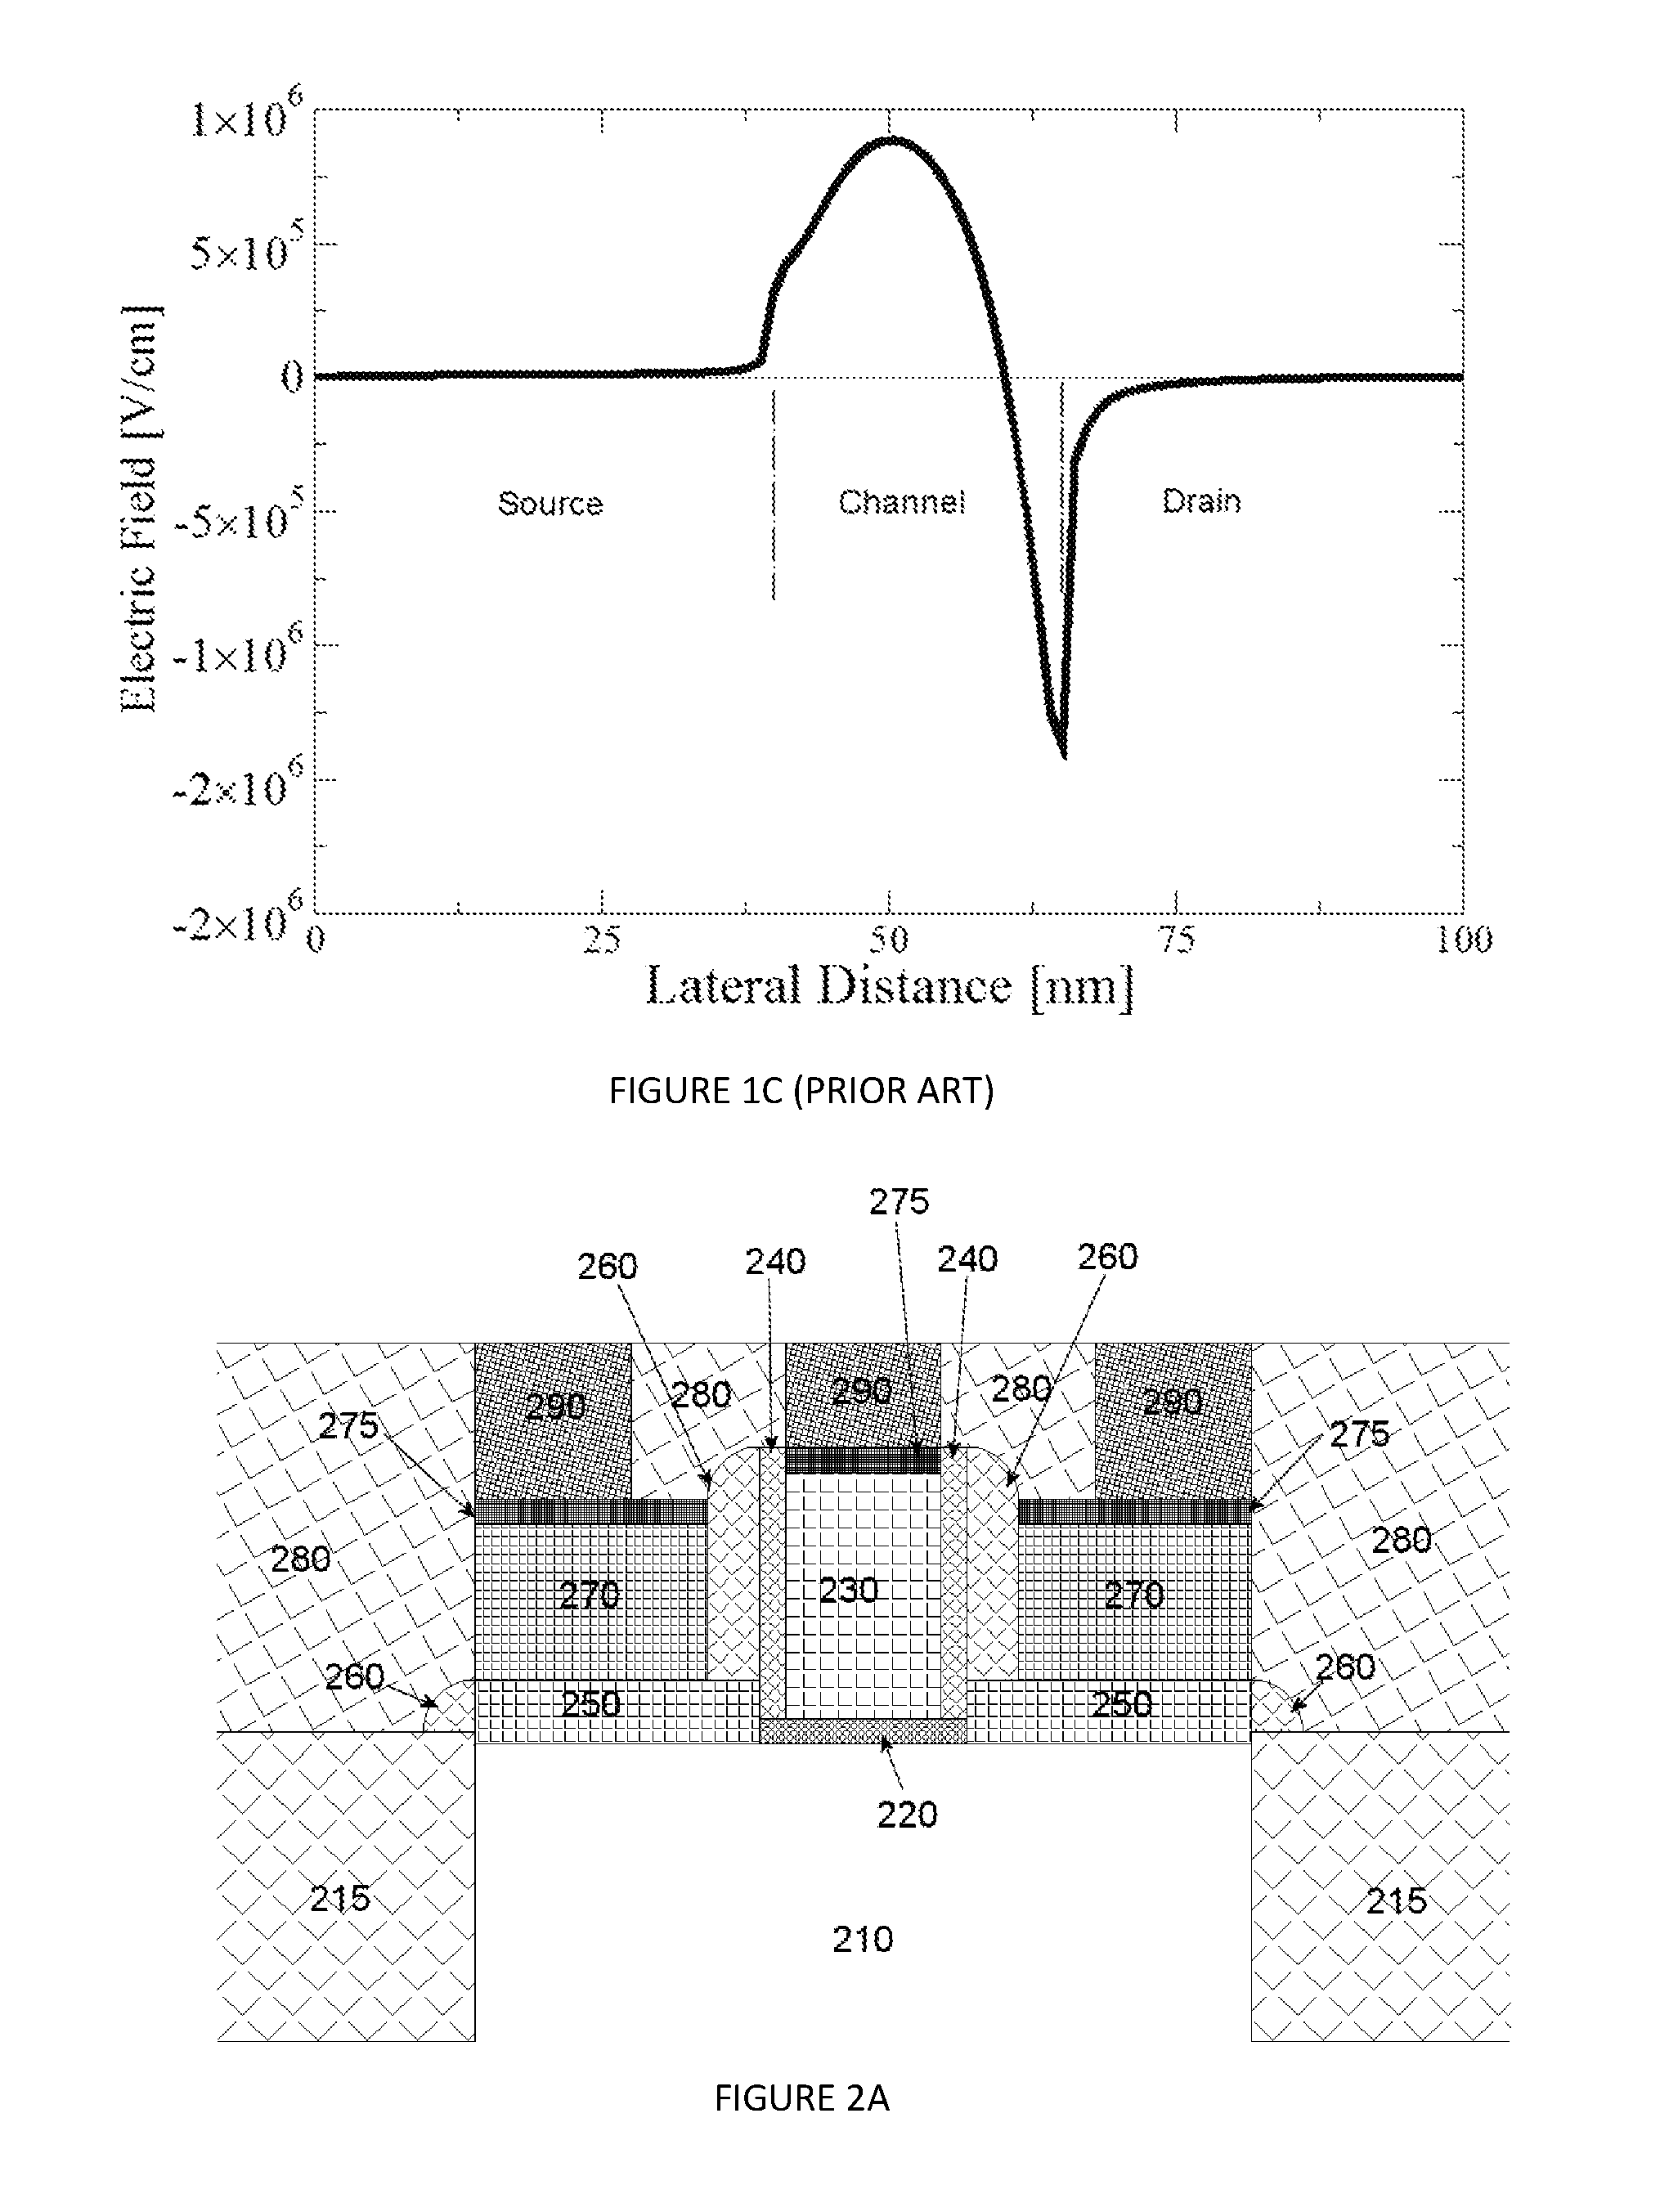 Reduced Local Threshold Voltage Variation MOSFET Using Multiple Layers of Epi for Improved Device Operation